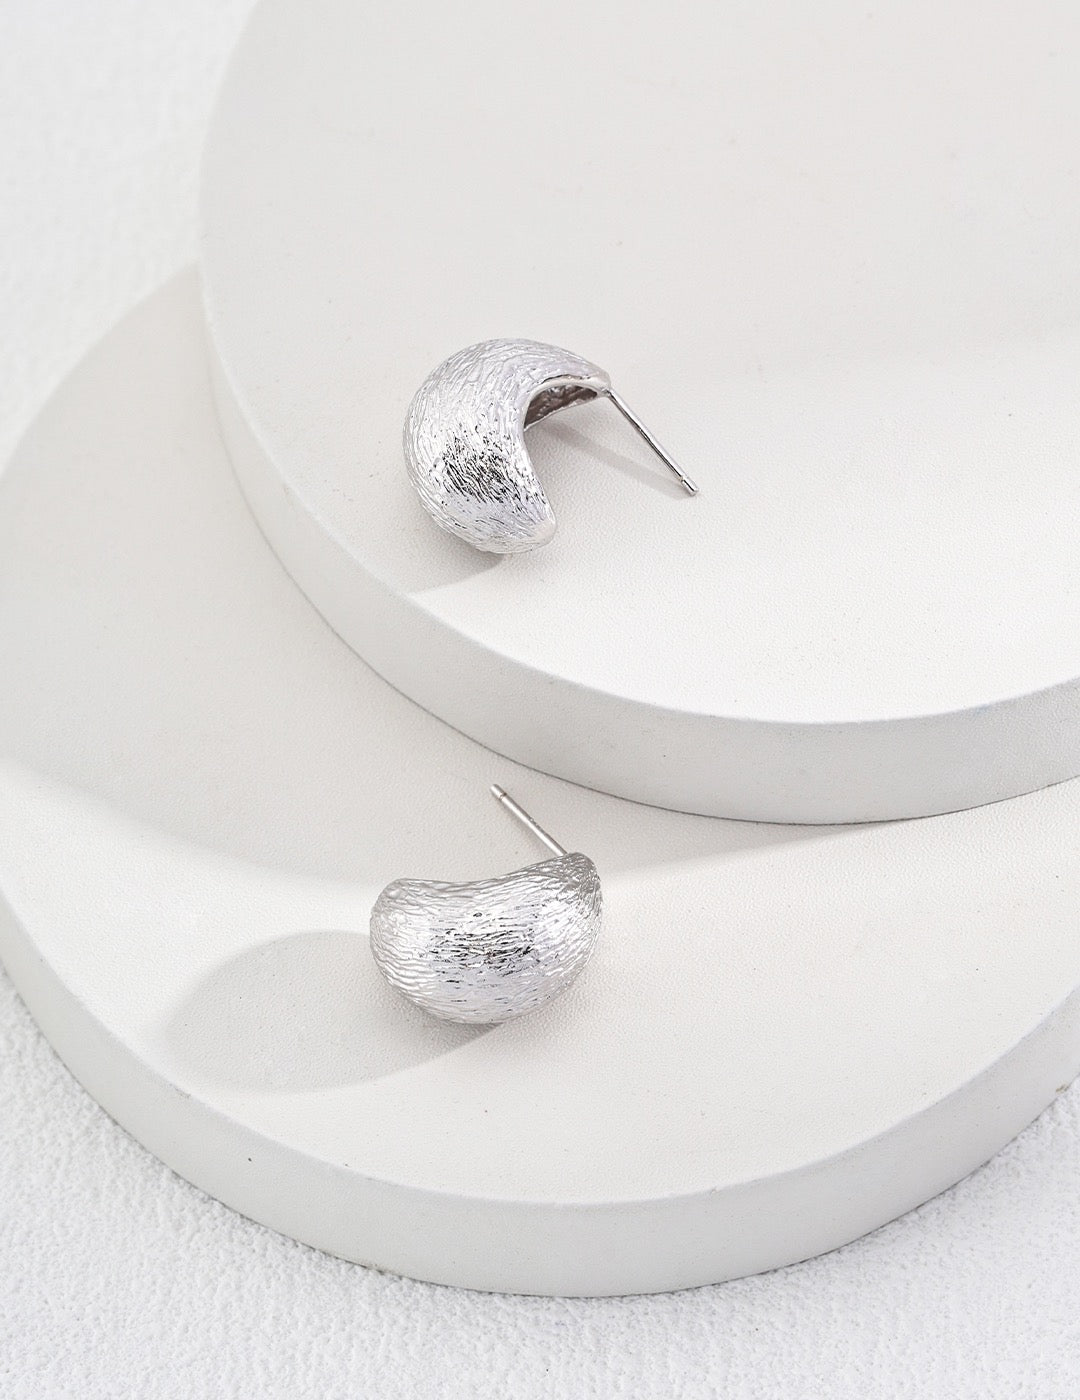 Meet Chris, Sterling Silver Water Drop Texture Studded Earring - Crystal Together